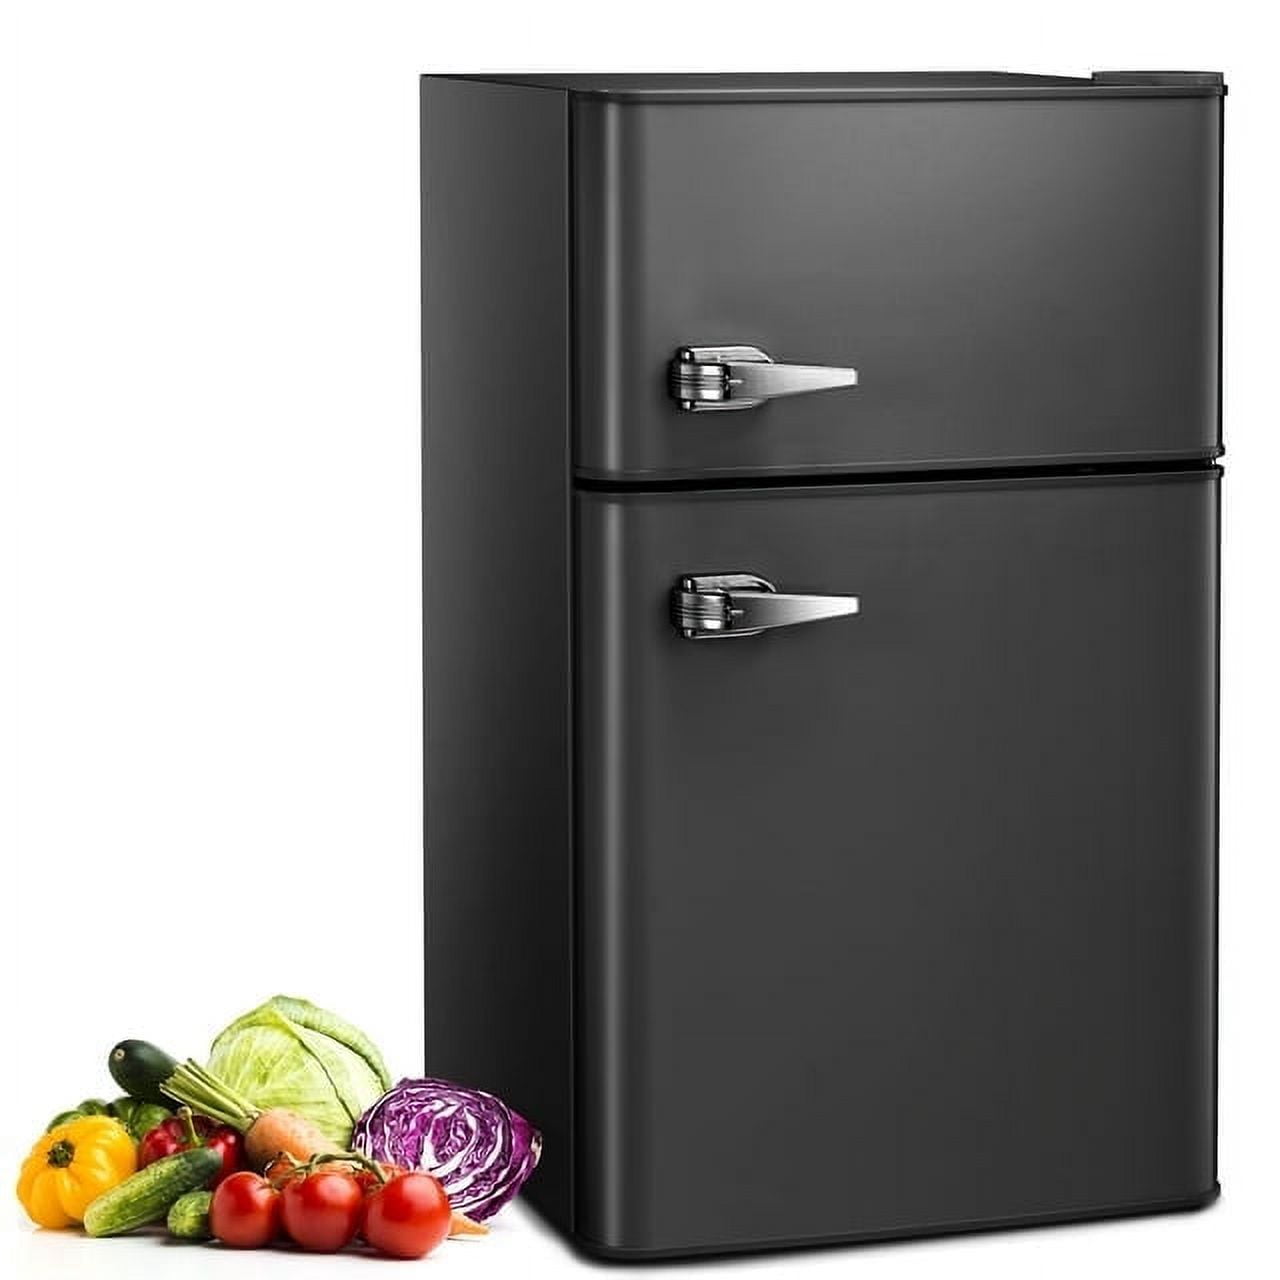 LHRIVER Mini Refrigerator 3.2Cu.Ft Compact Fridge 2-Double Doors with a Freezer Low Noise Defrost Storage of Beverages Vegetables and Fruits for Home Office Dorm